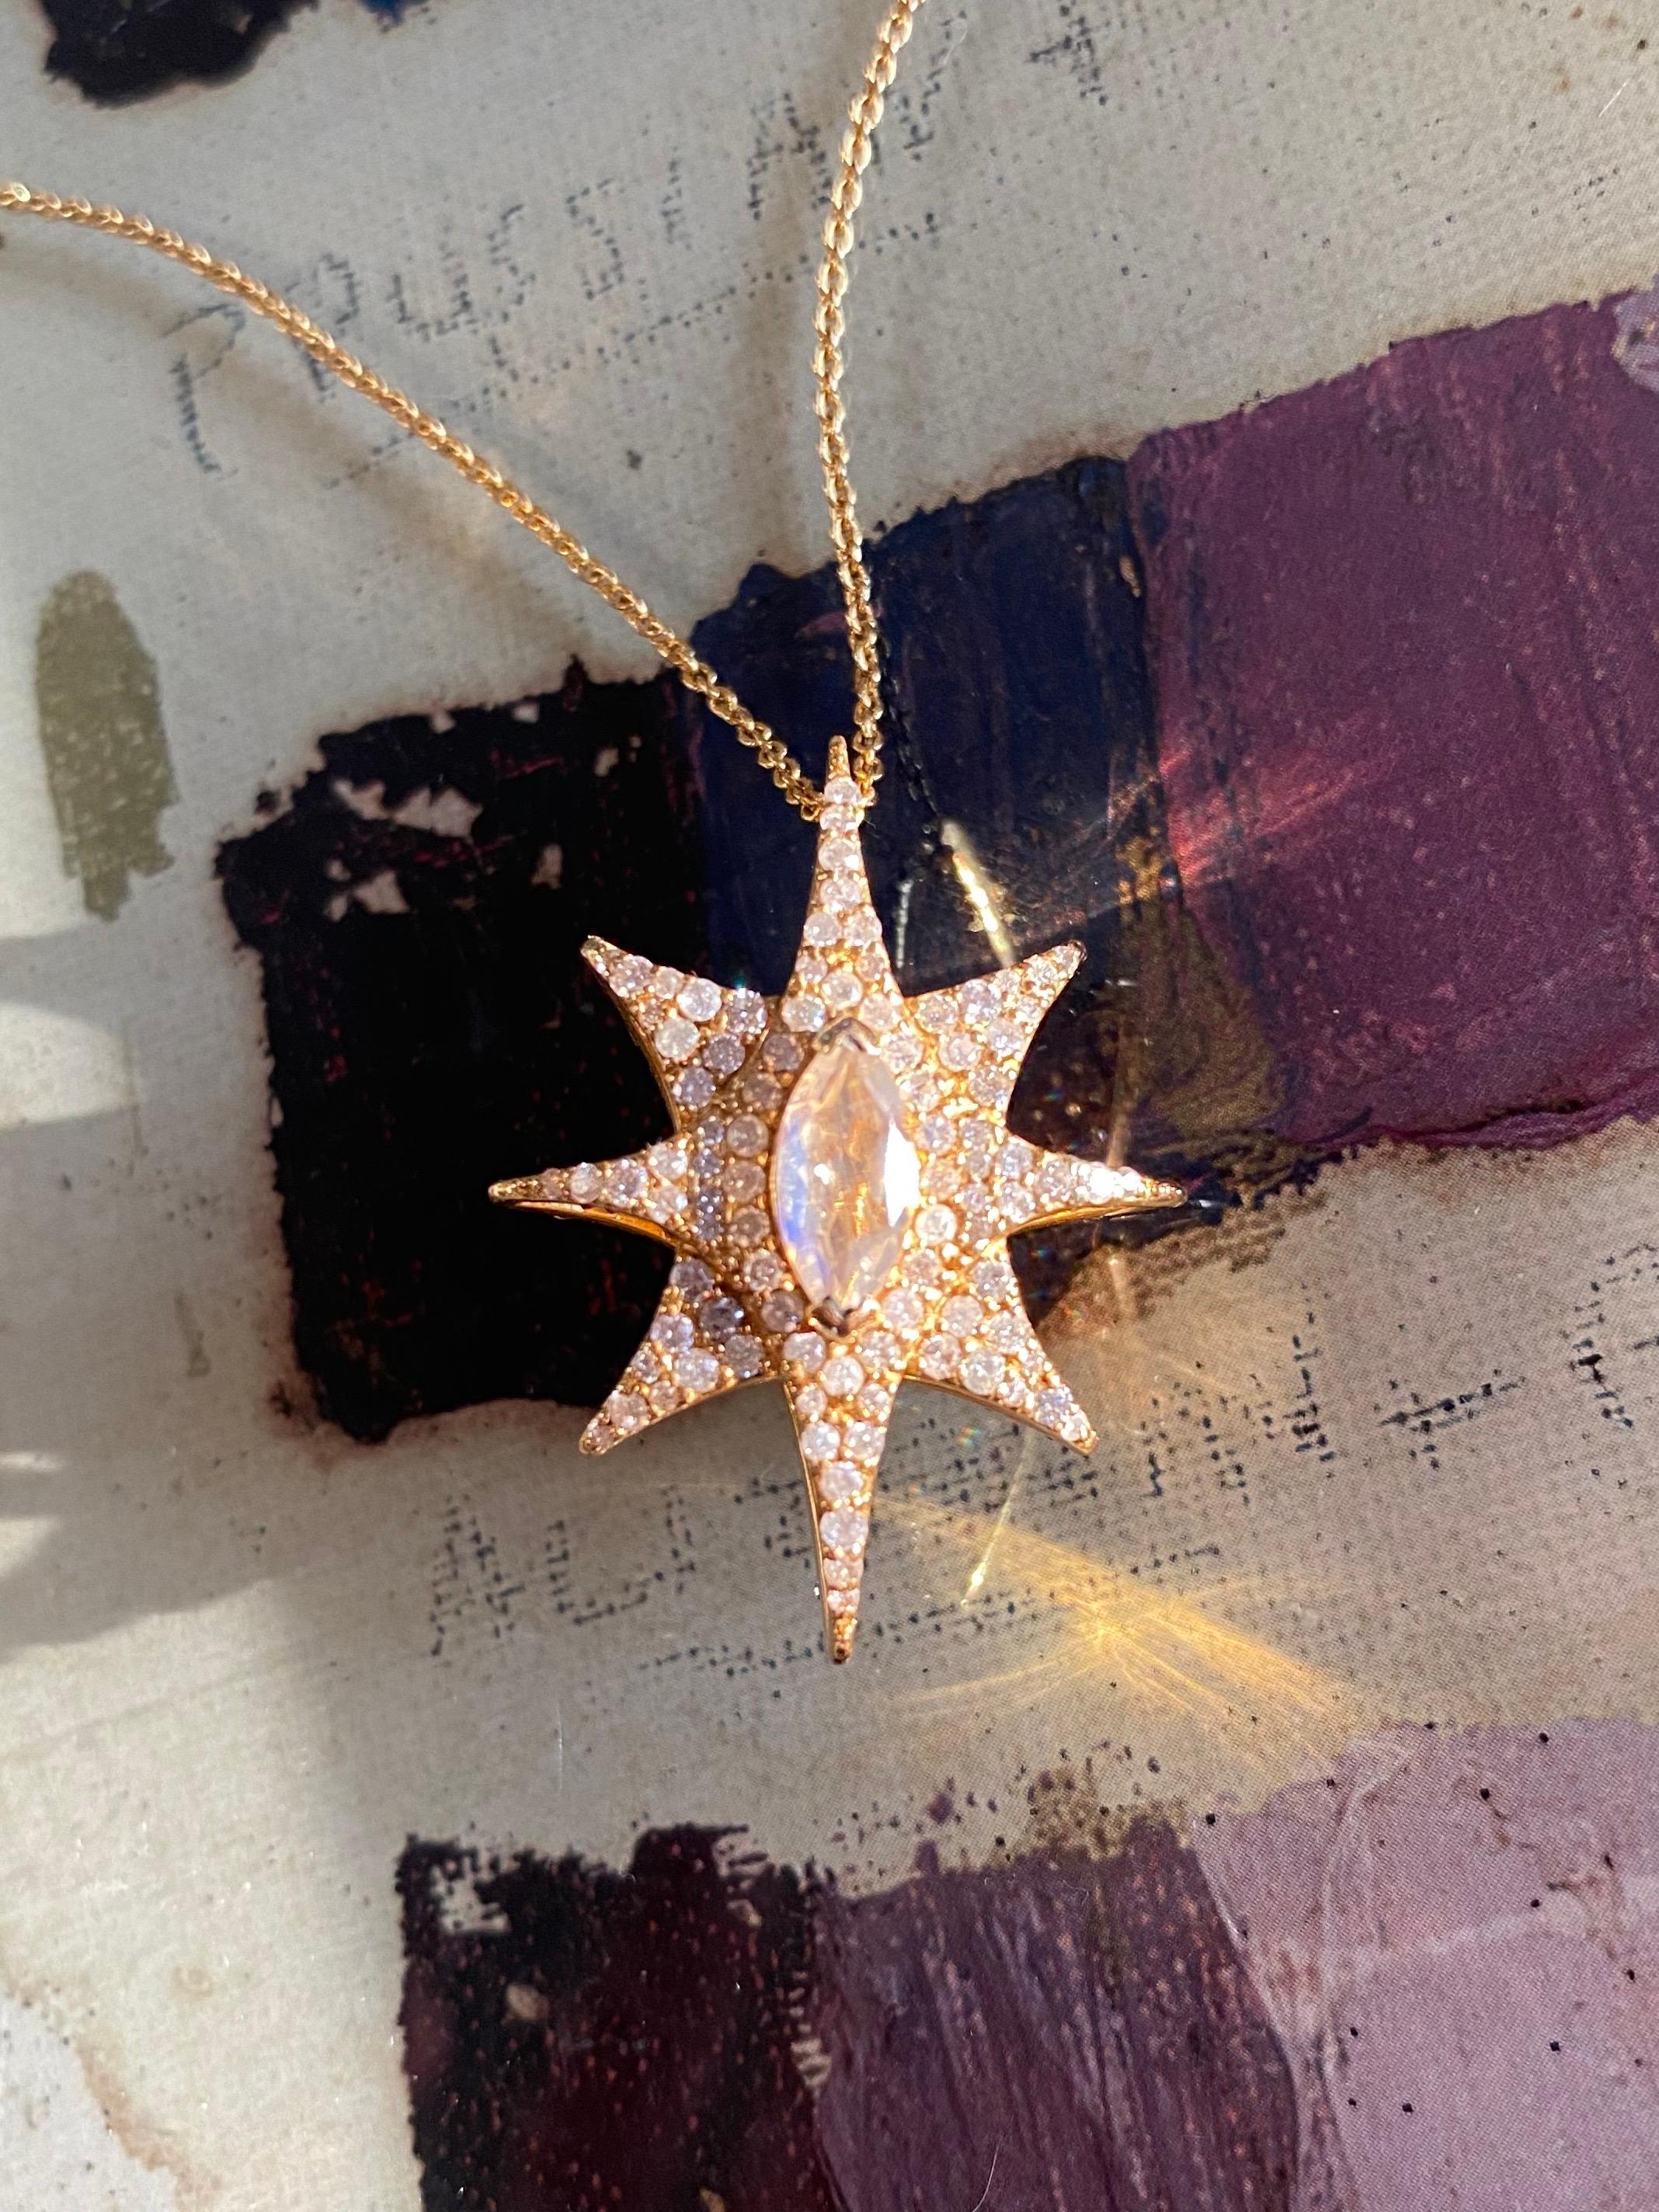 This double-sided star pendant boasts 1.60 carats of diamonds, with white diamonds on one side, and a surprise of green diamonds on the other side.  Each side has a beautiful rainbow moonstone marquis stone in the center of the starburst.  The total